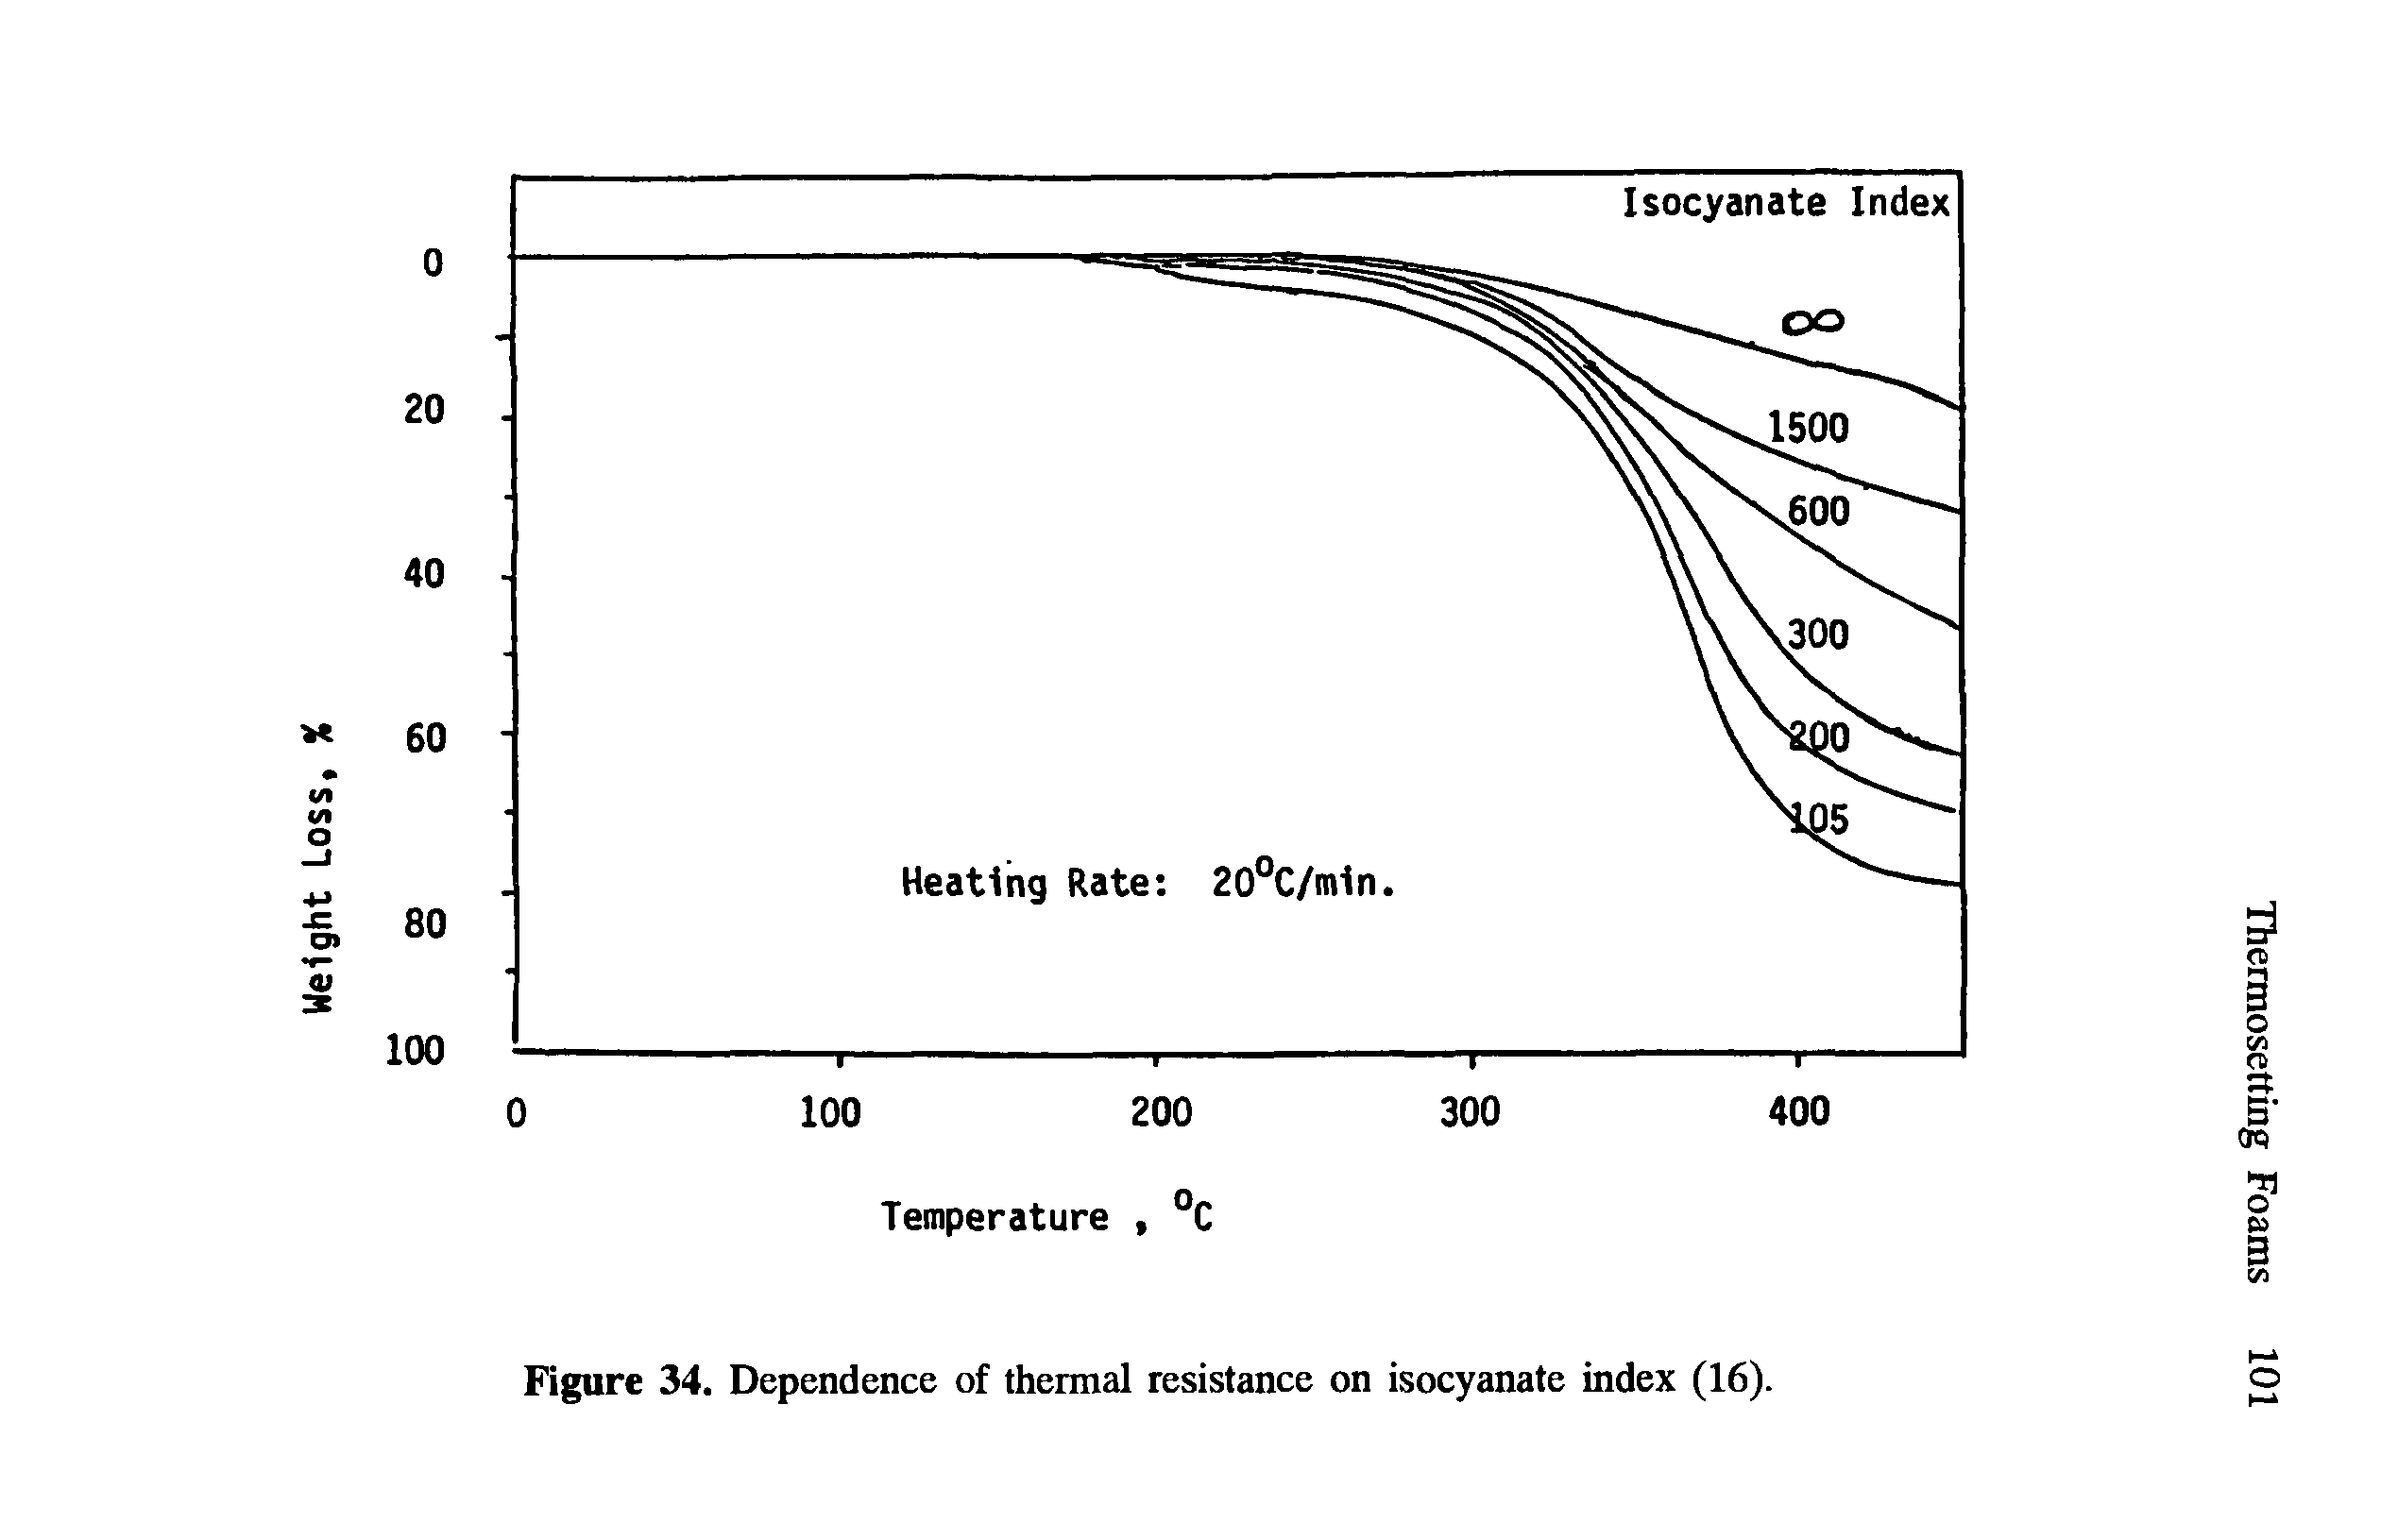 Figure 34. Dependence of thermal resistance on isocyanate index (16).